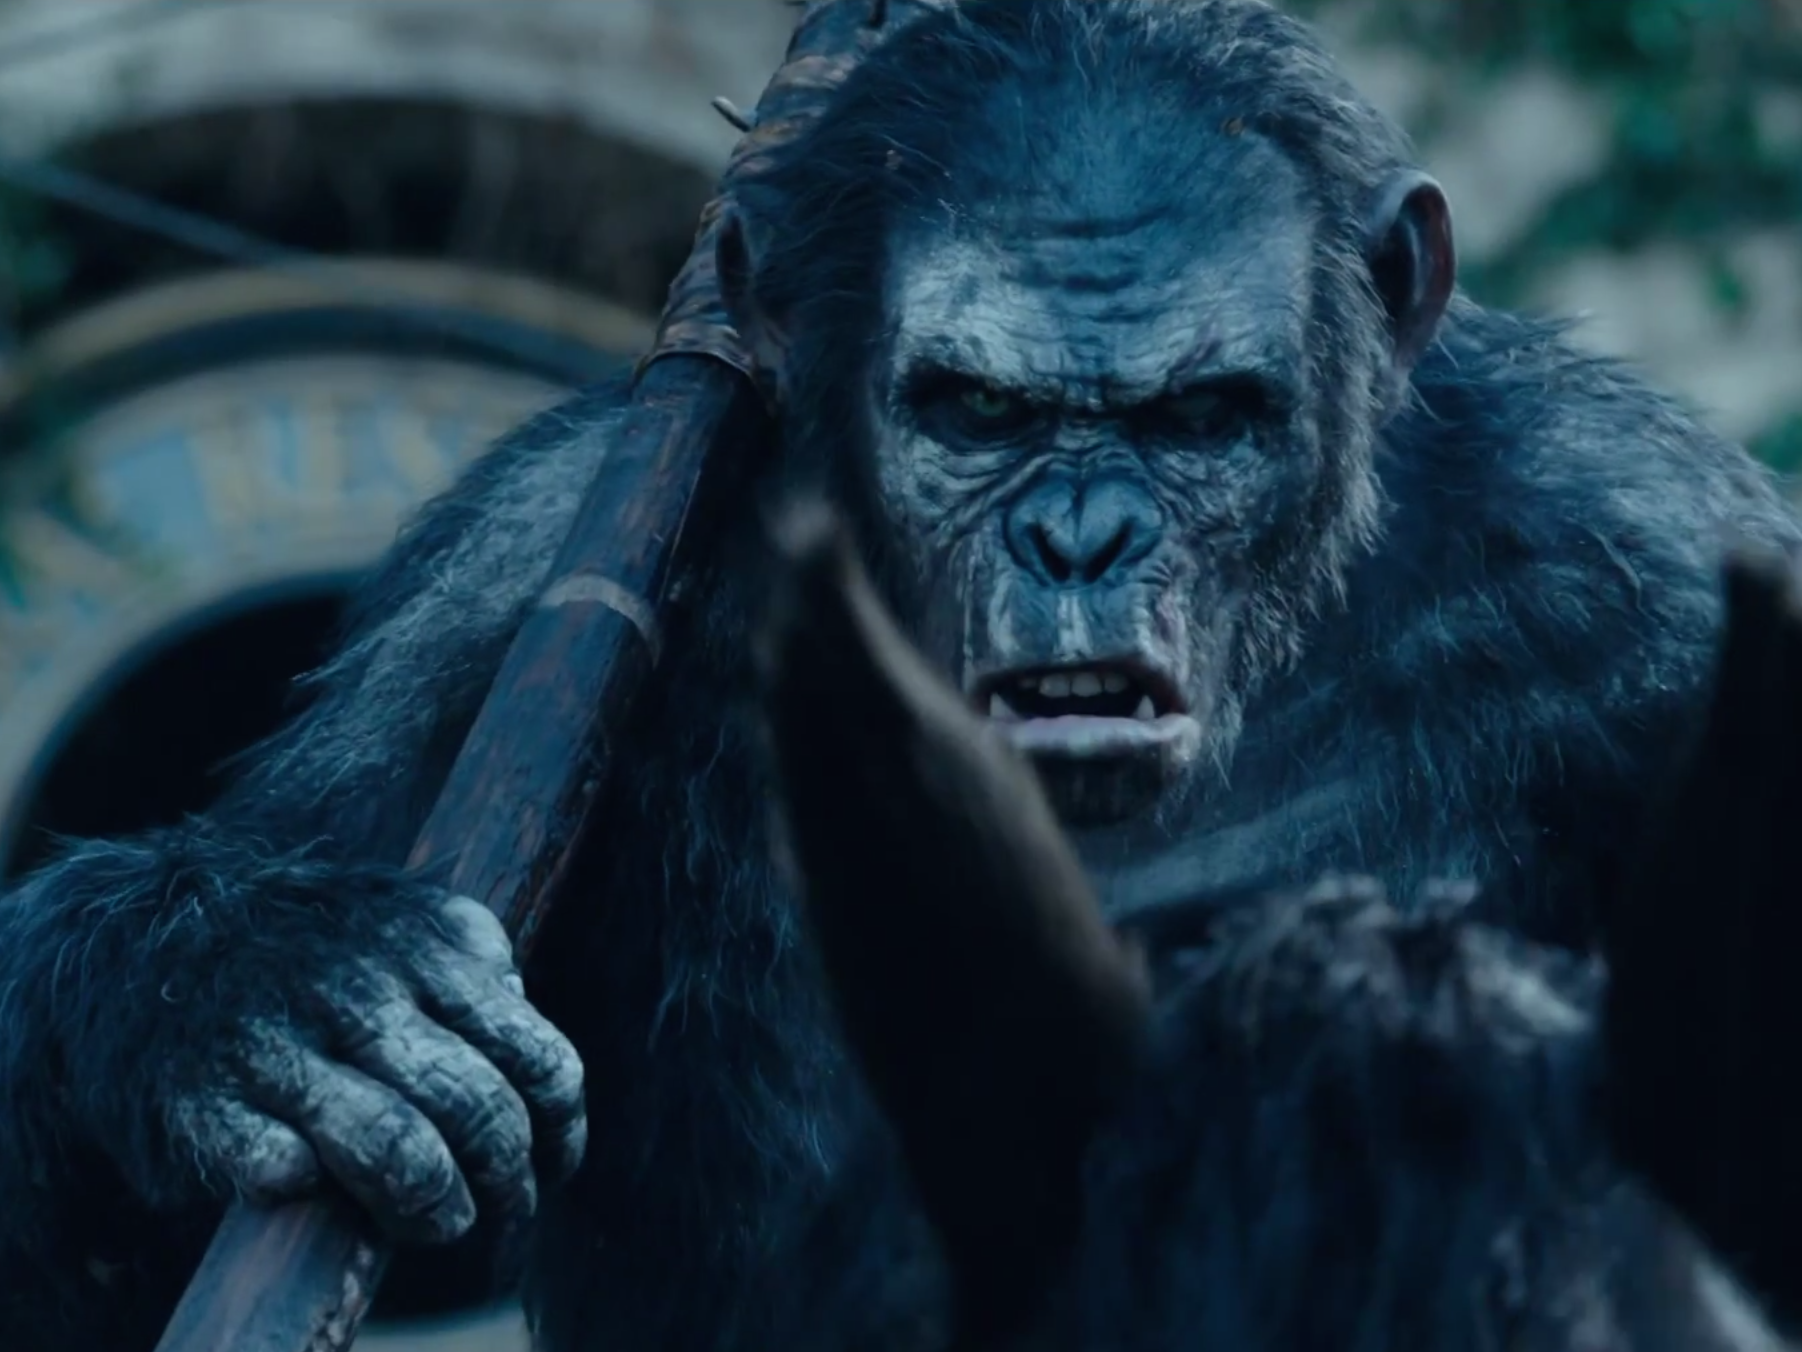 dawn of the planet of the apes wallpaper,human,primate,fictional character,common chimpanzee,movie